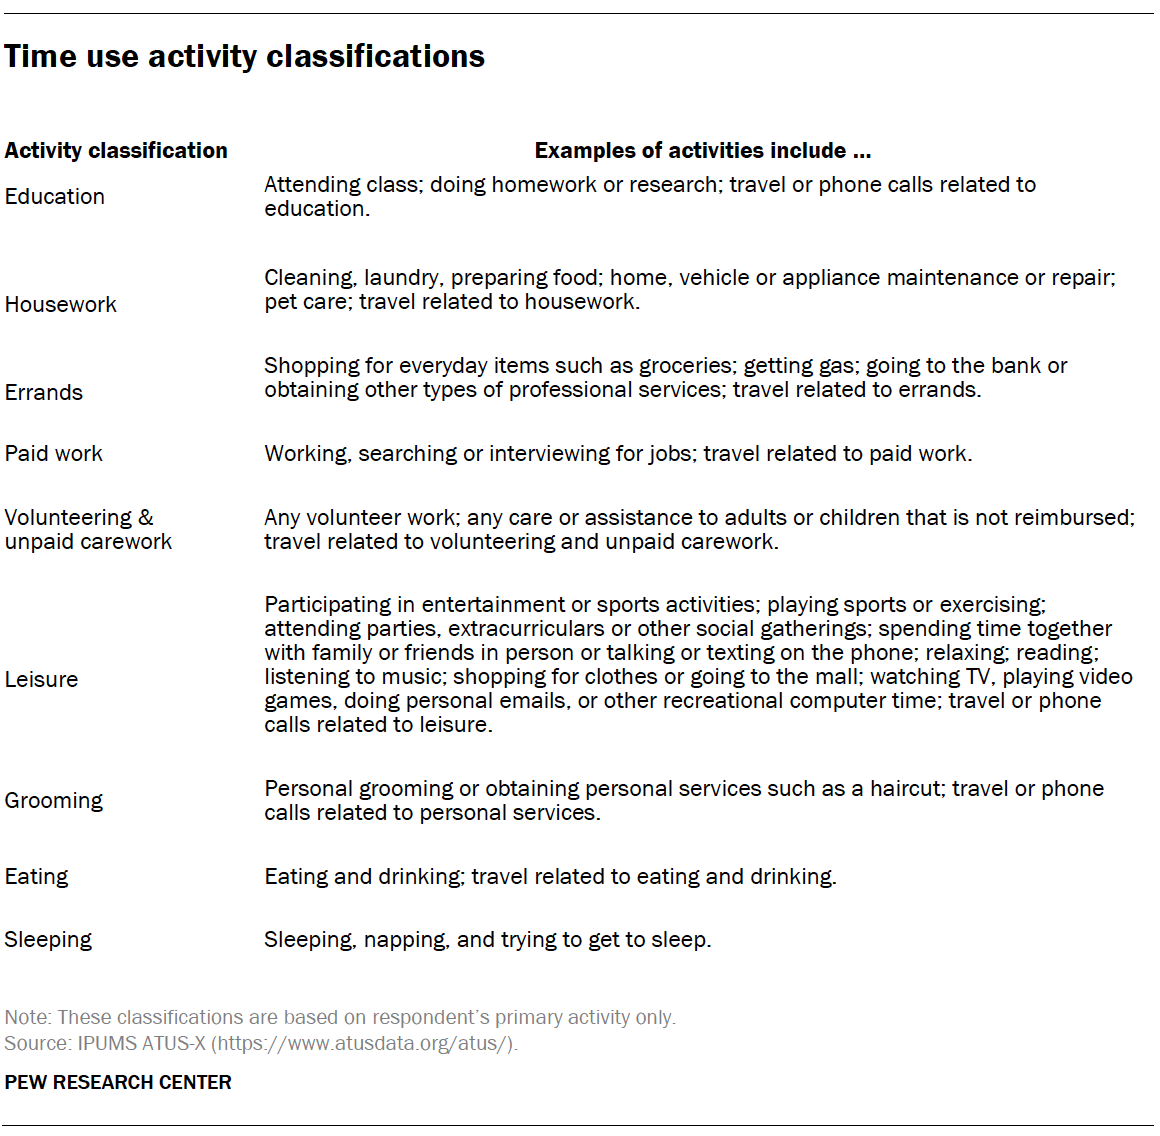 Time use activity classifications